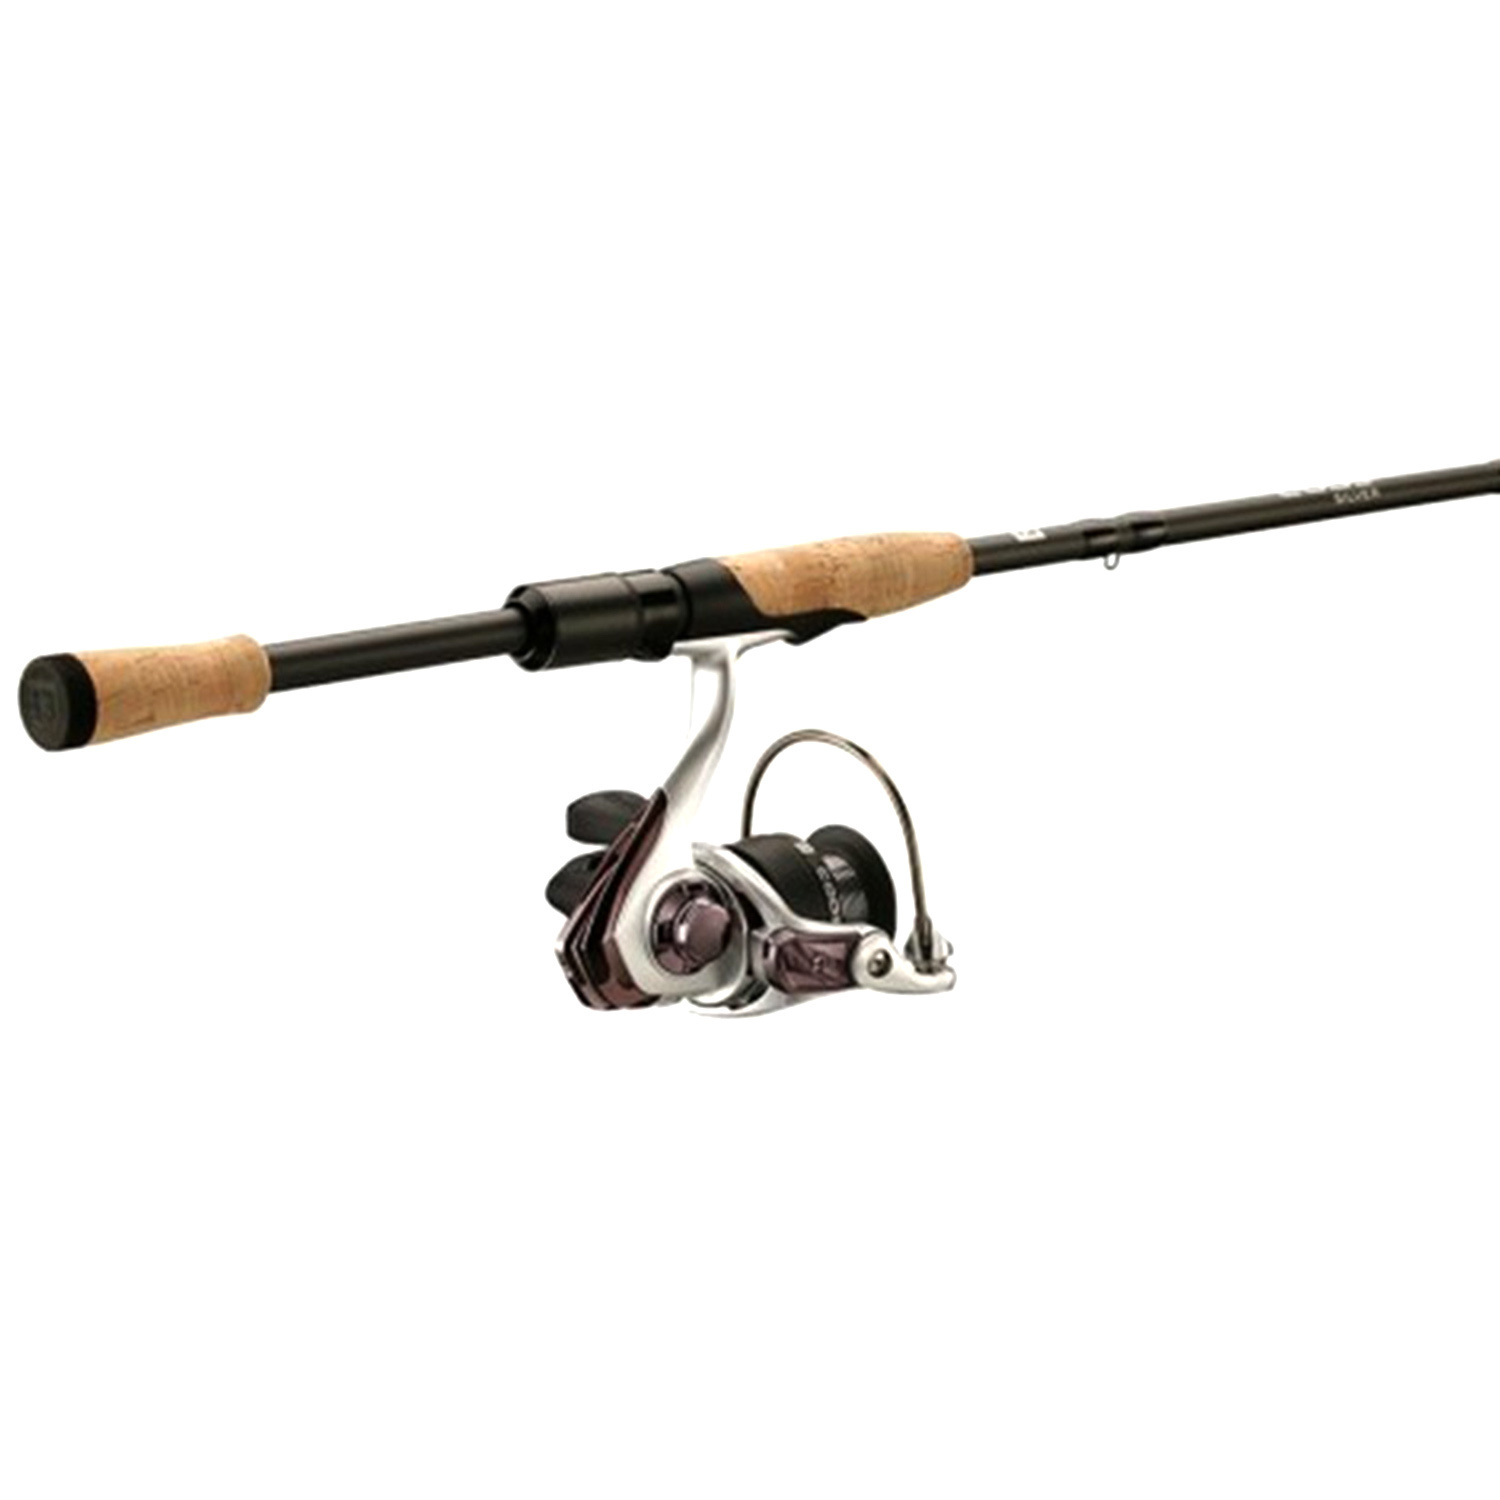 13 Fishing Code Silver Spinning Combo